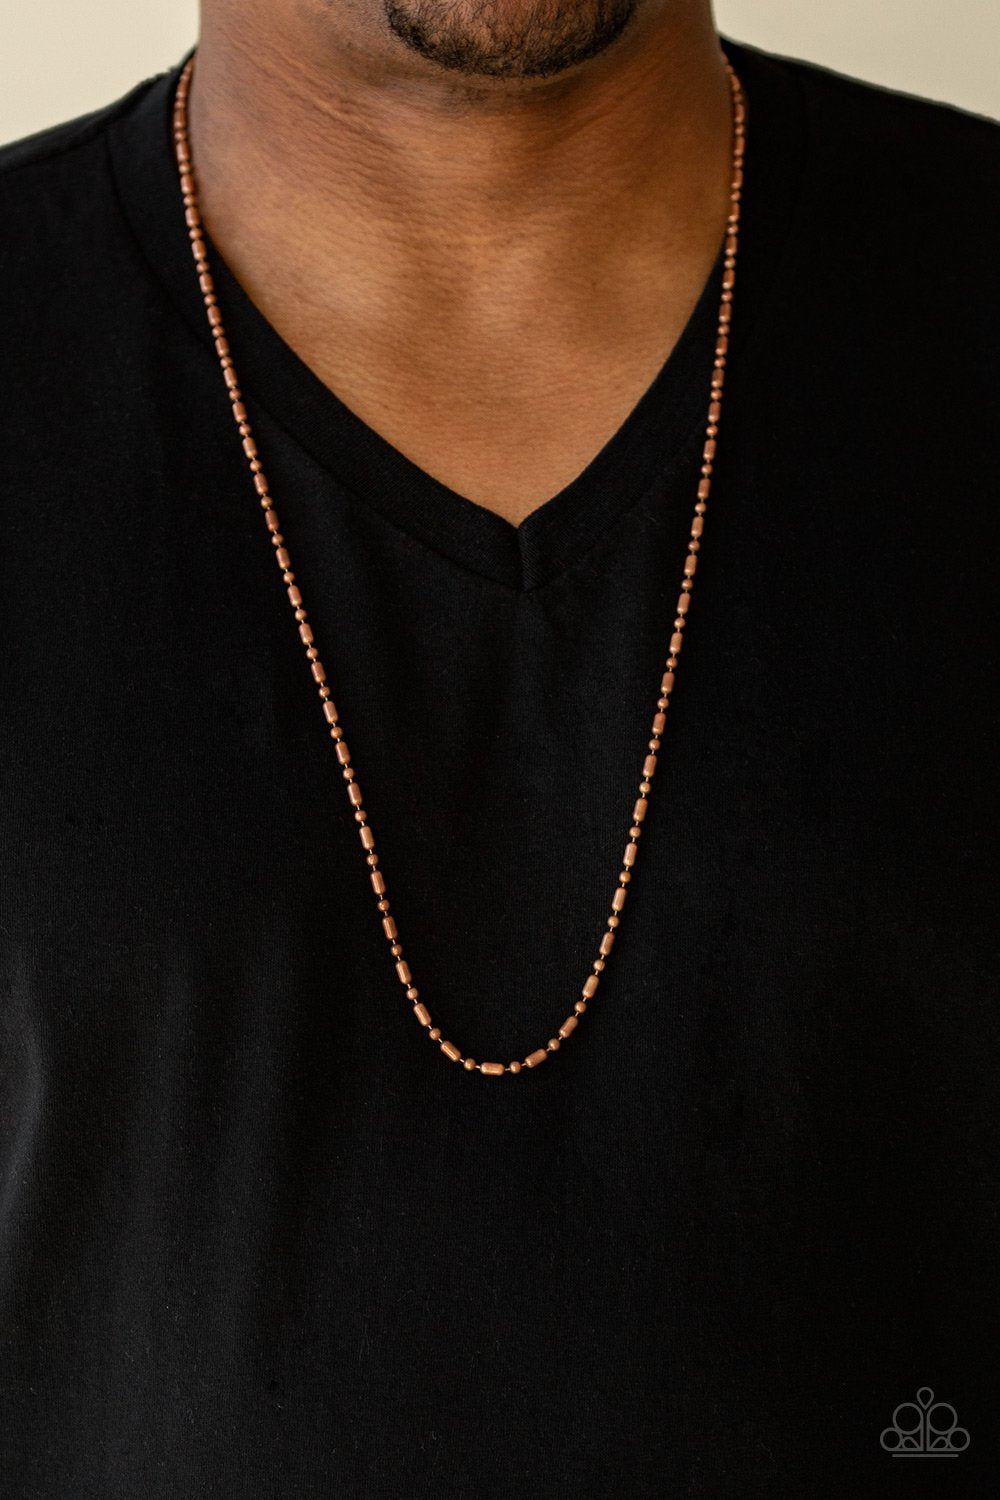 Covert Operation Copper Necklace - Daria's Blings N Things